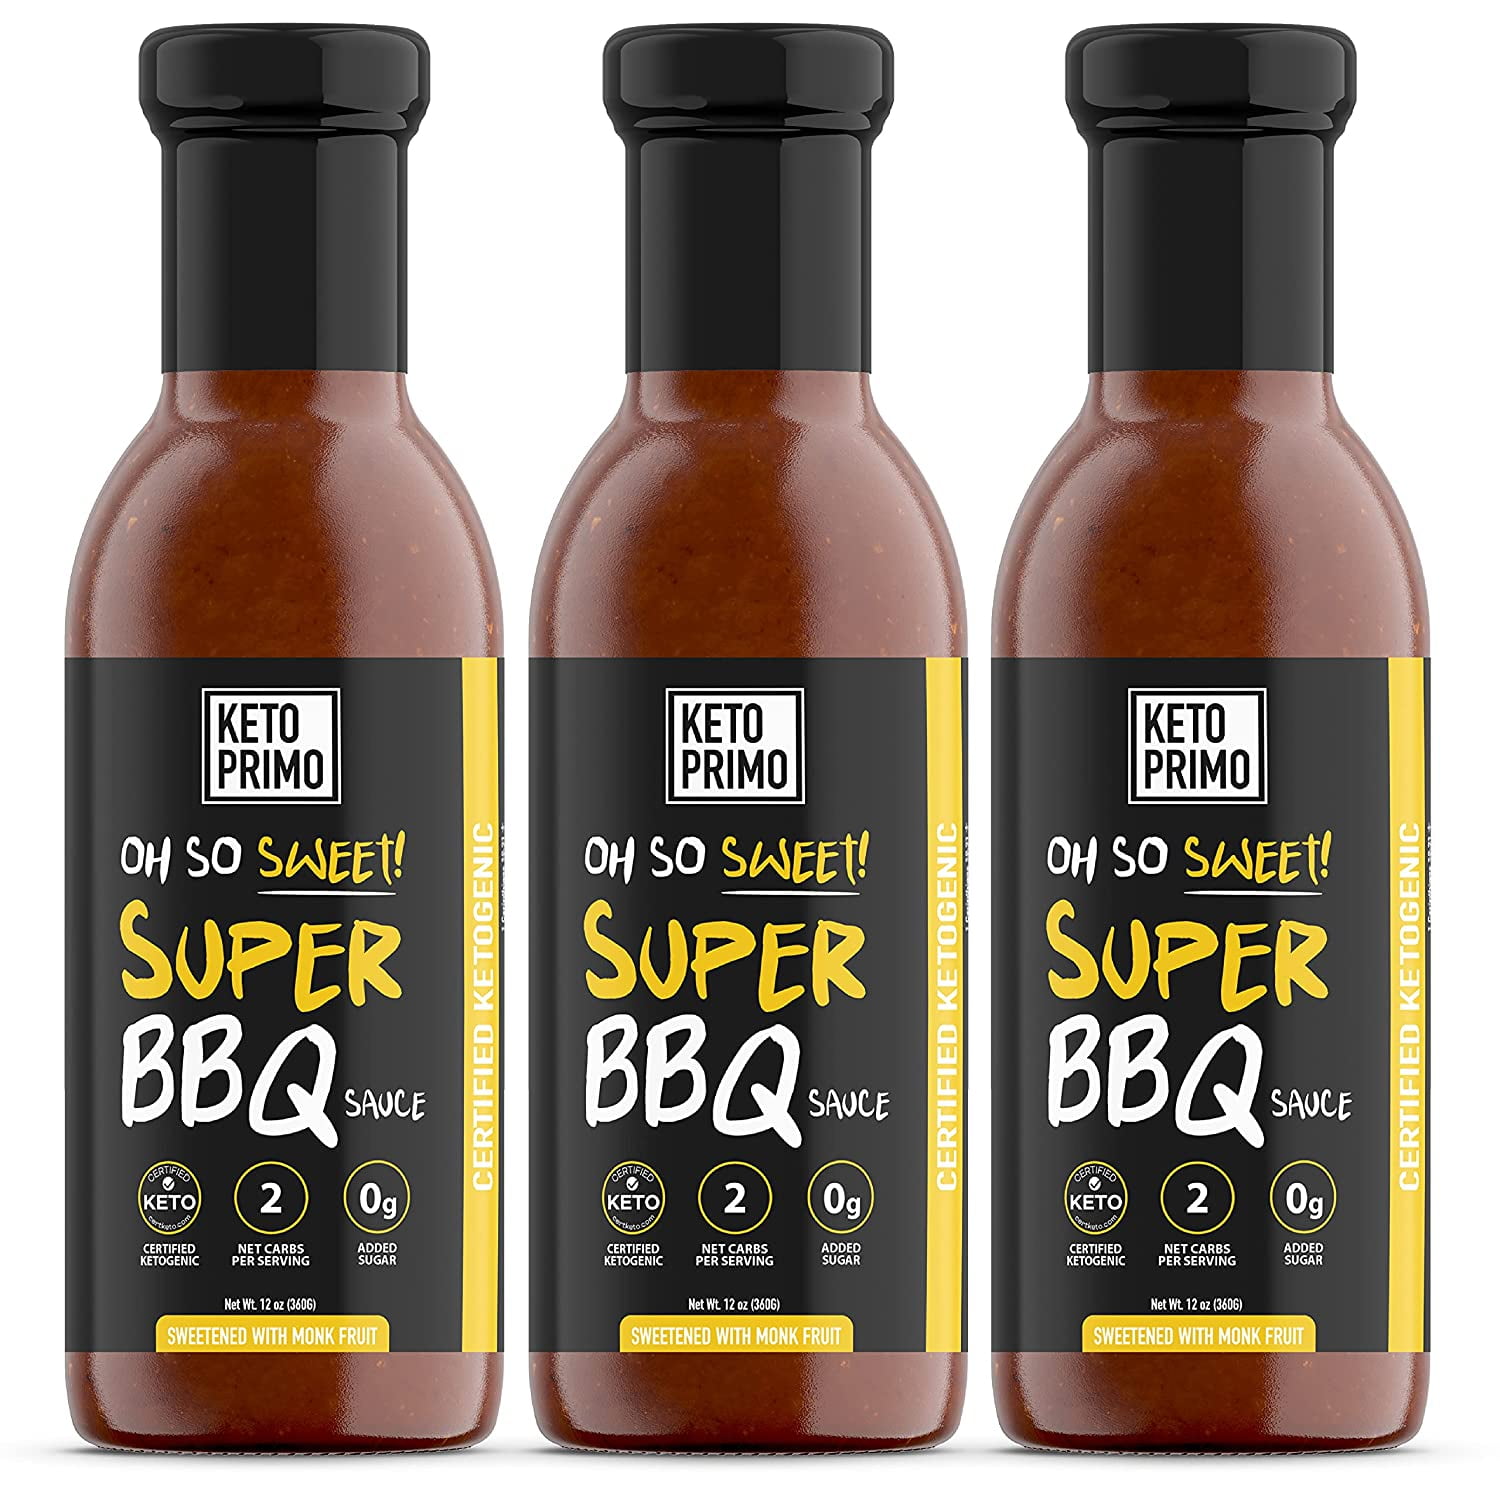 The Ultimate Guide to the Best Sugar-Free BBQ Sauce